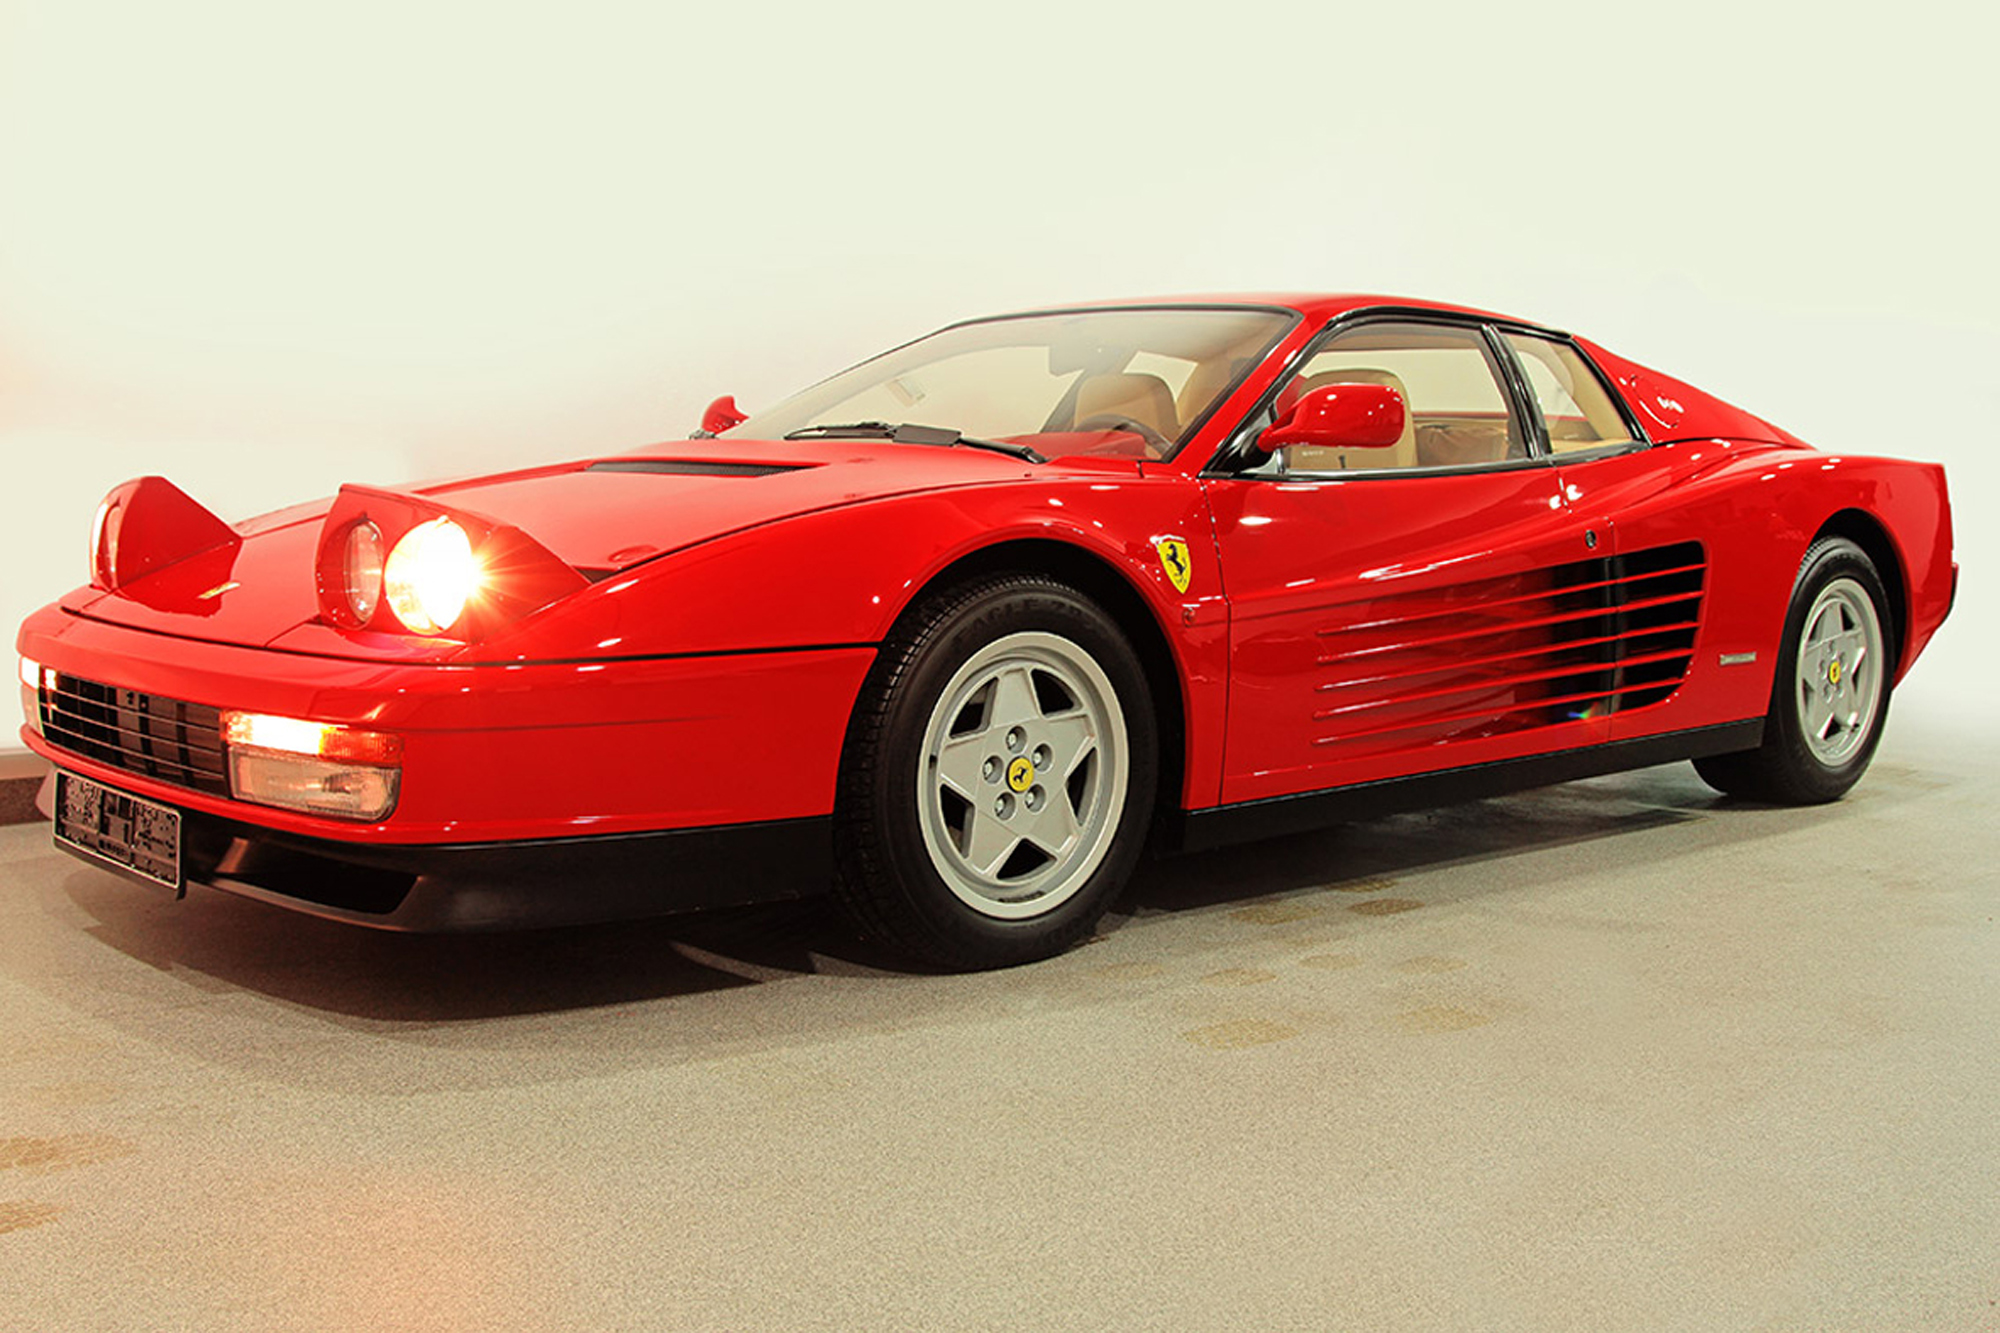 A staggeringly low mileage 1991 Testarossa sold for a premium inclusive total of £202,500, a huge £72,500 over its lower estimate and a new world record price.